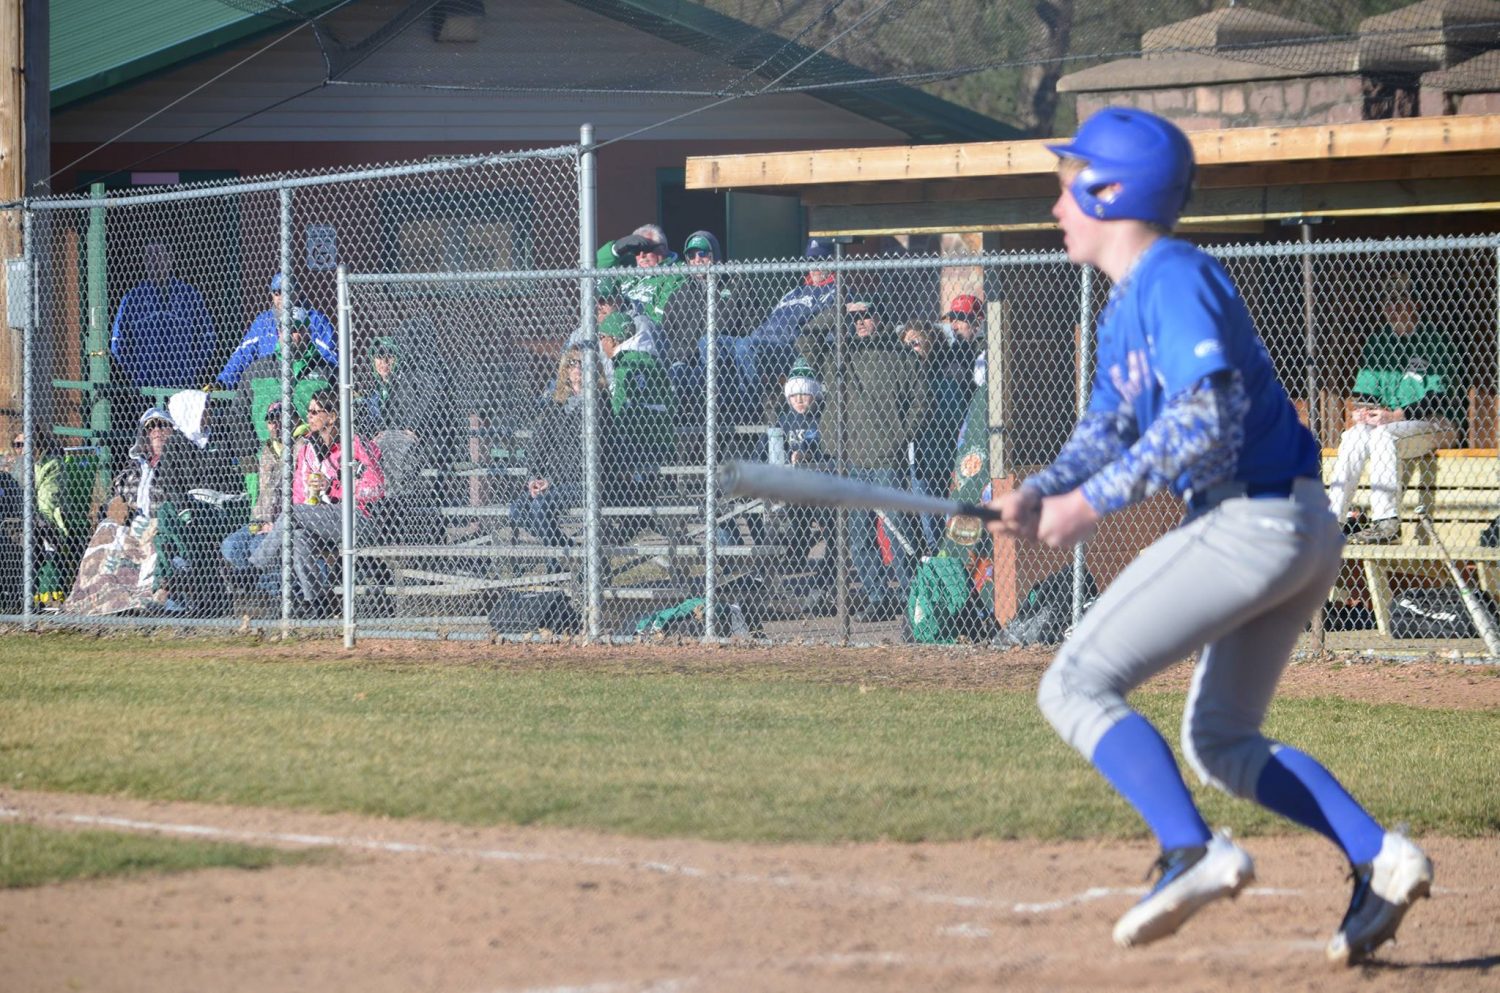 Hiccups and triumph open the season for Bluejay baseball